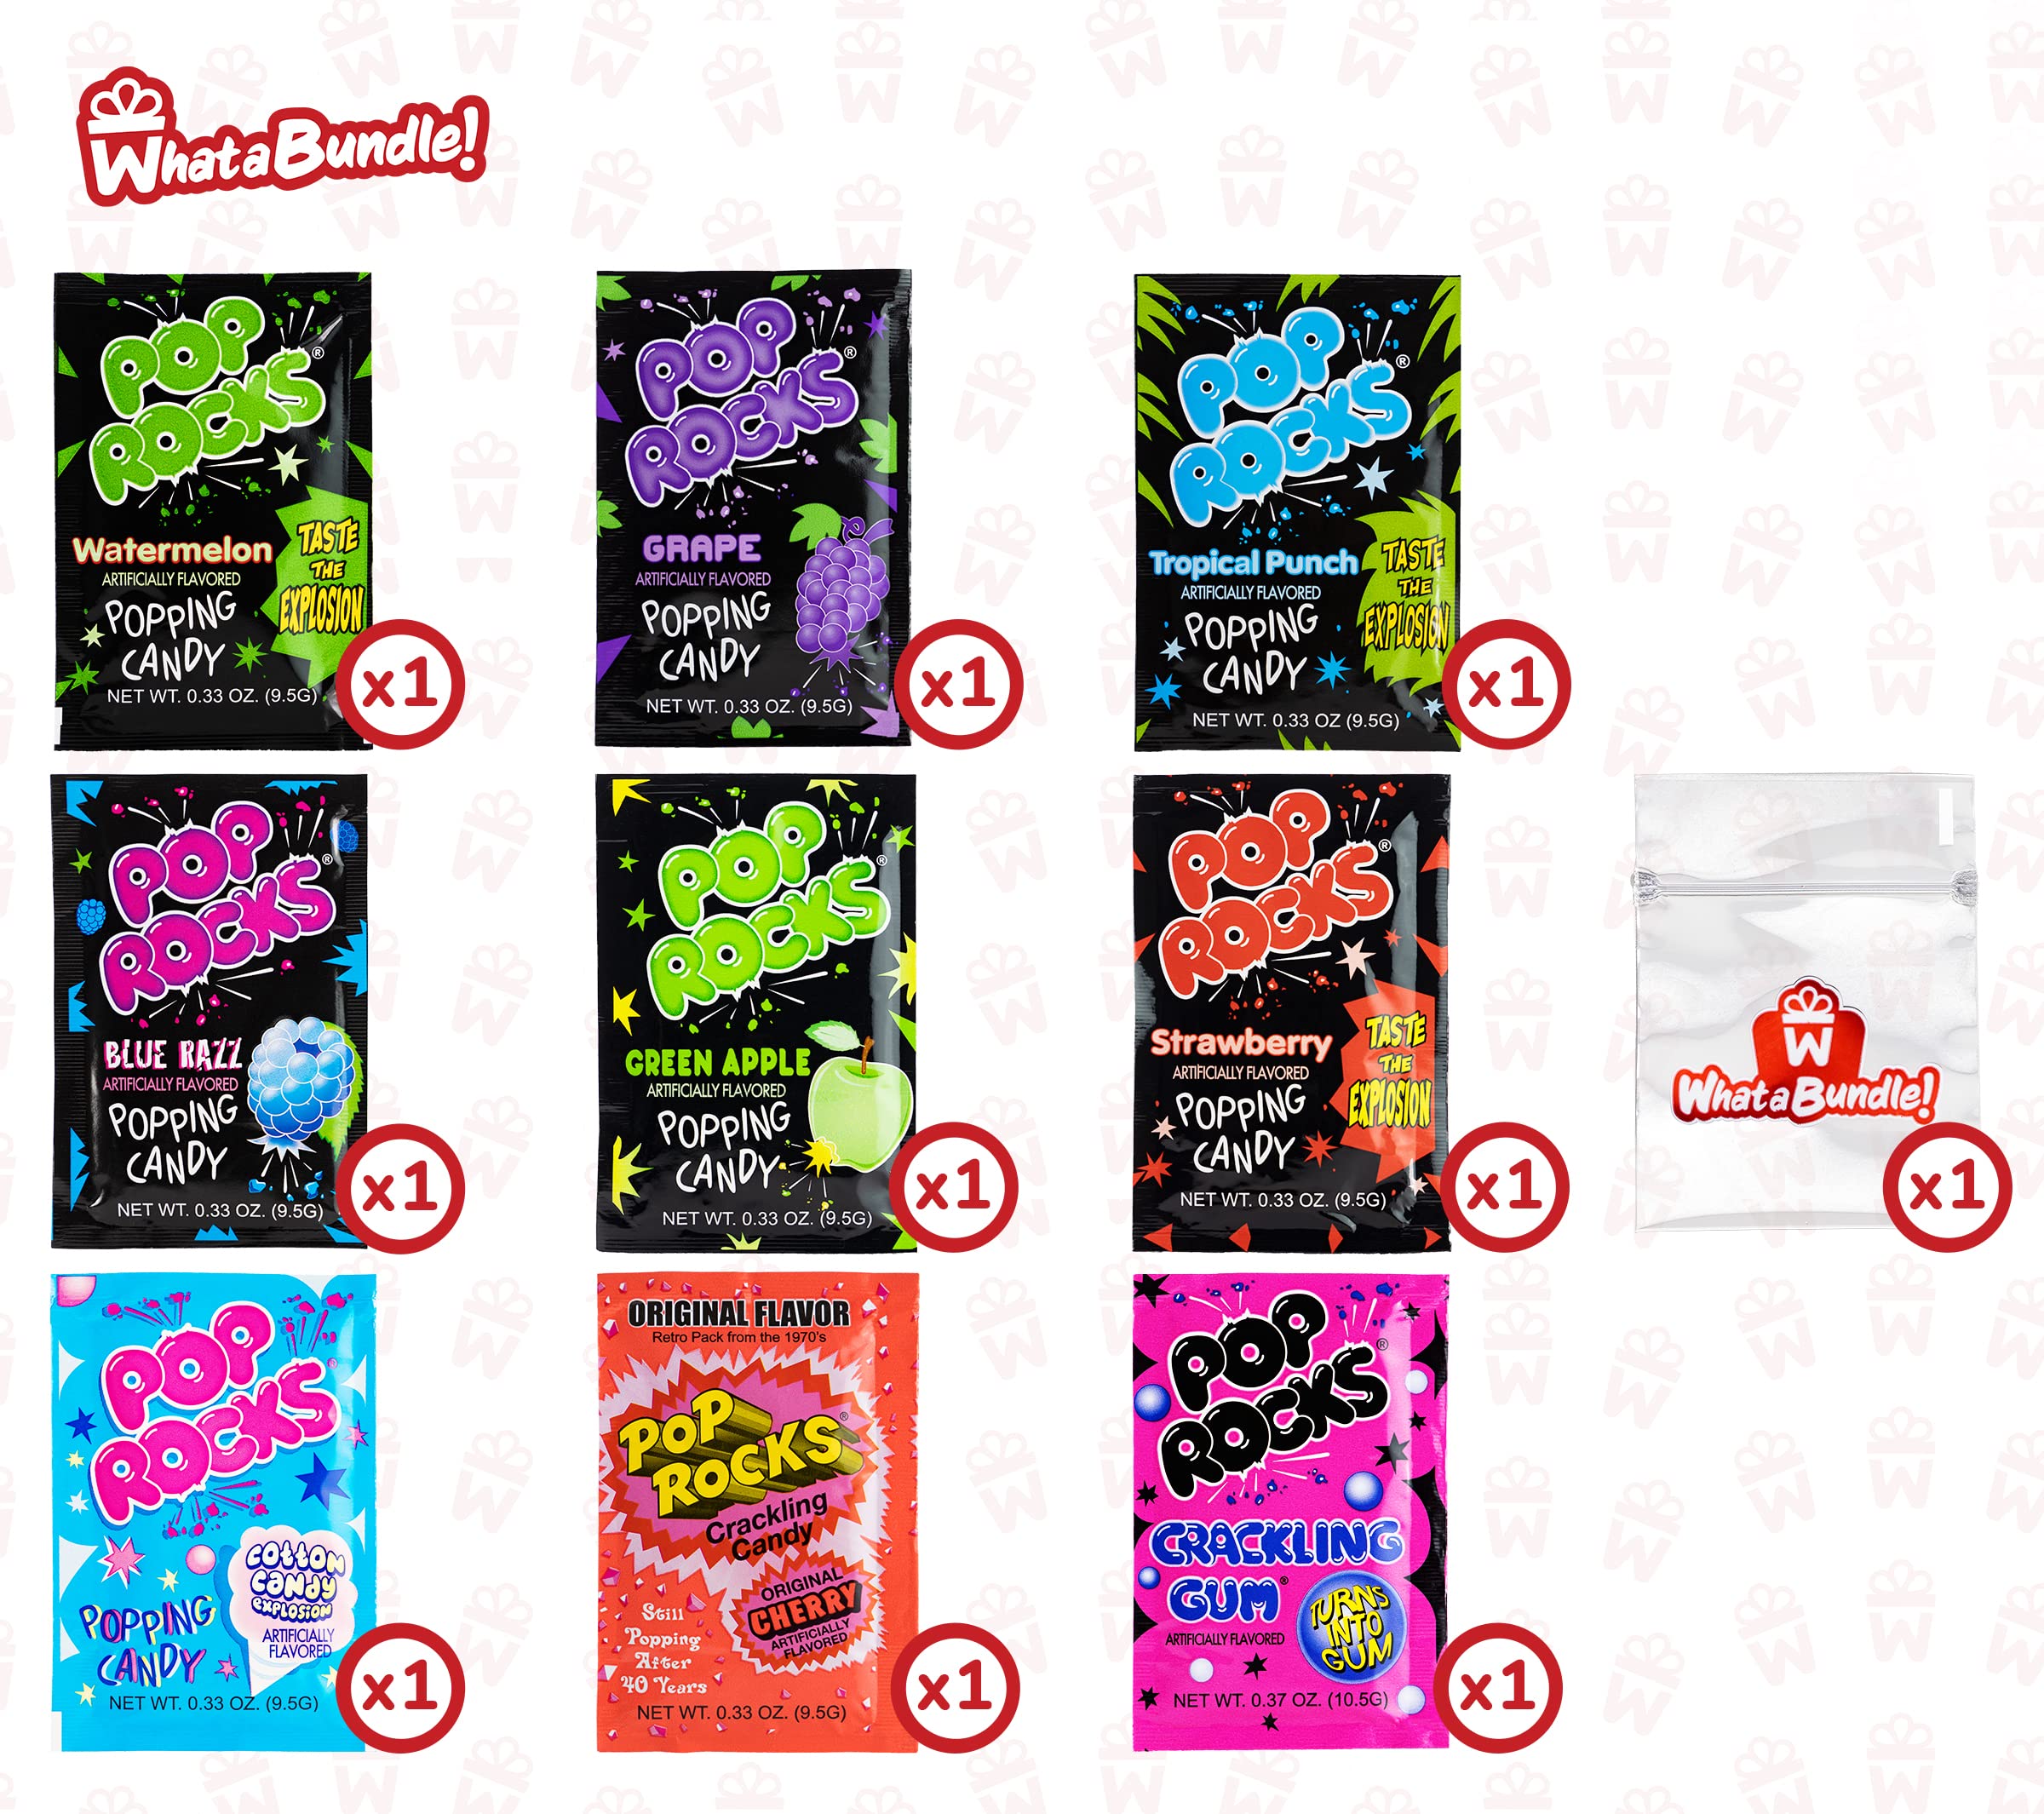 Pop Rocks Candy Variety Pack (9 Pack - 1 of All 9 Flavors) - Nostalgic 90s Old School Popping Candy for Parties - Bundle with WhataBundle! Pocket Bag